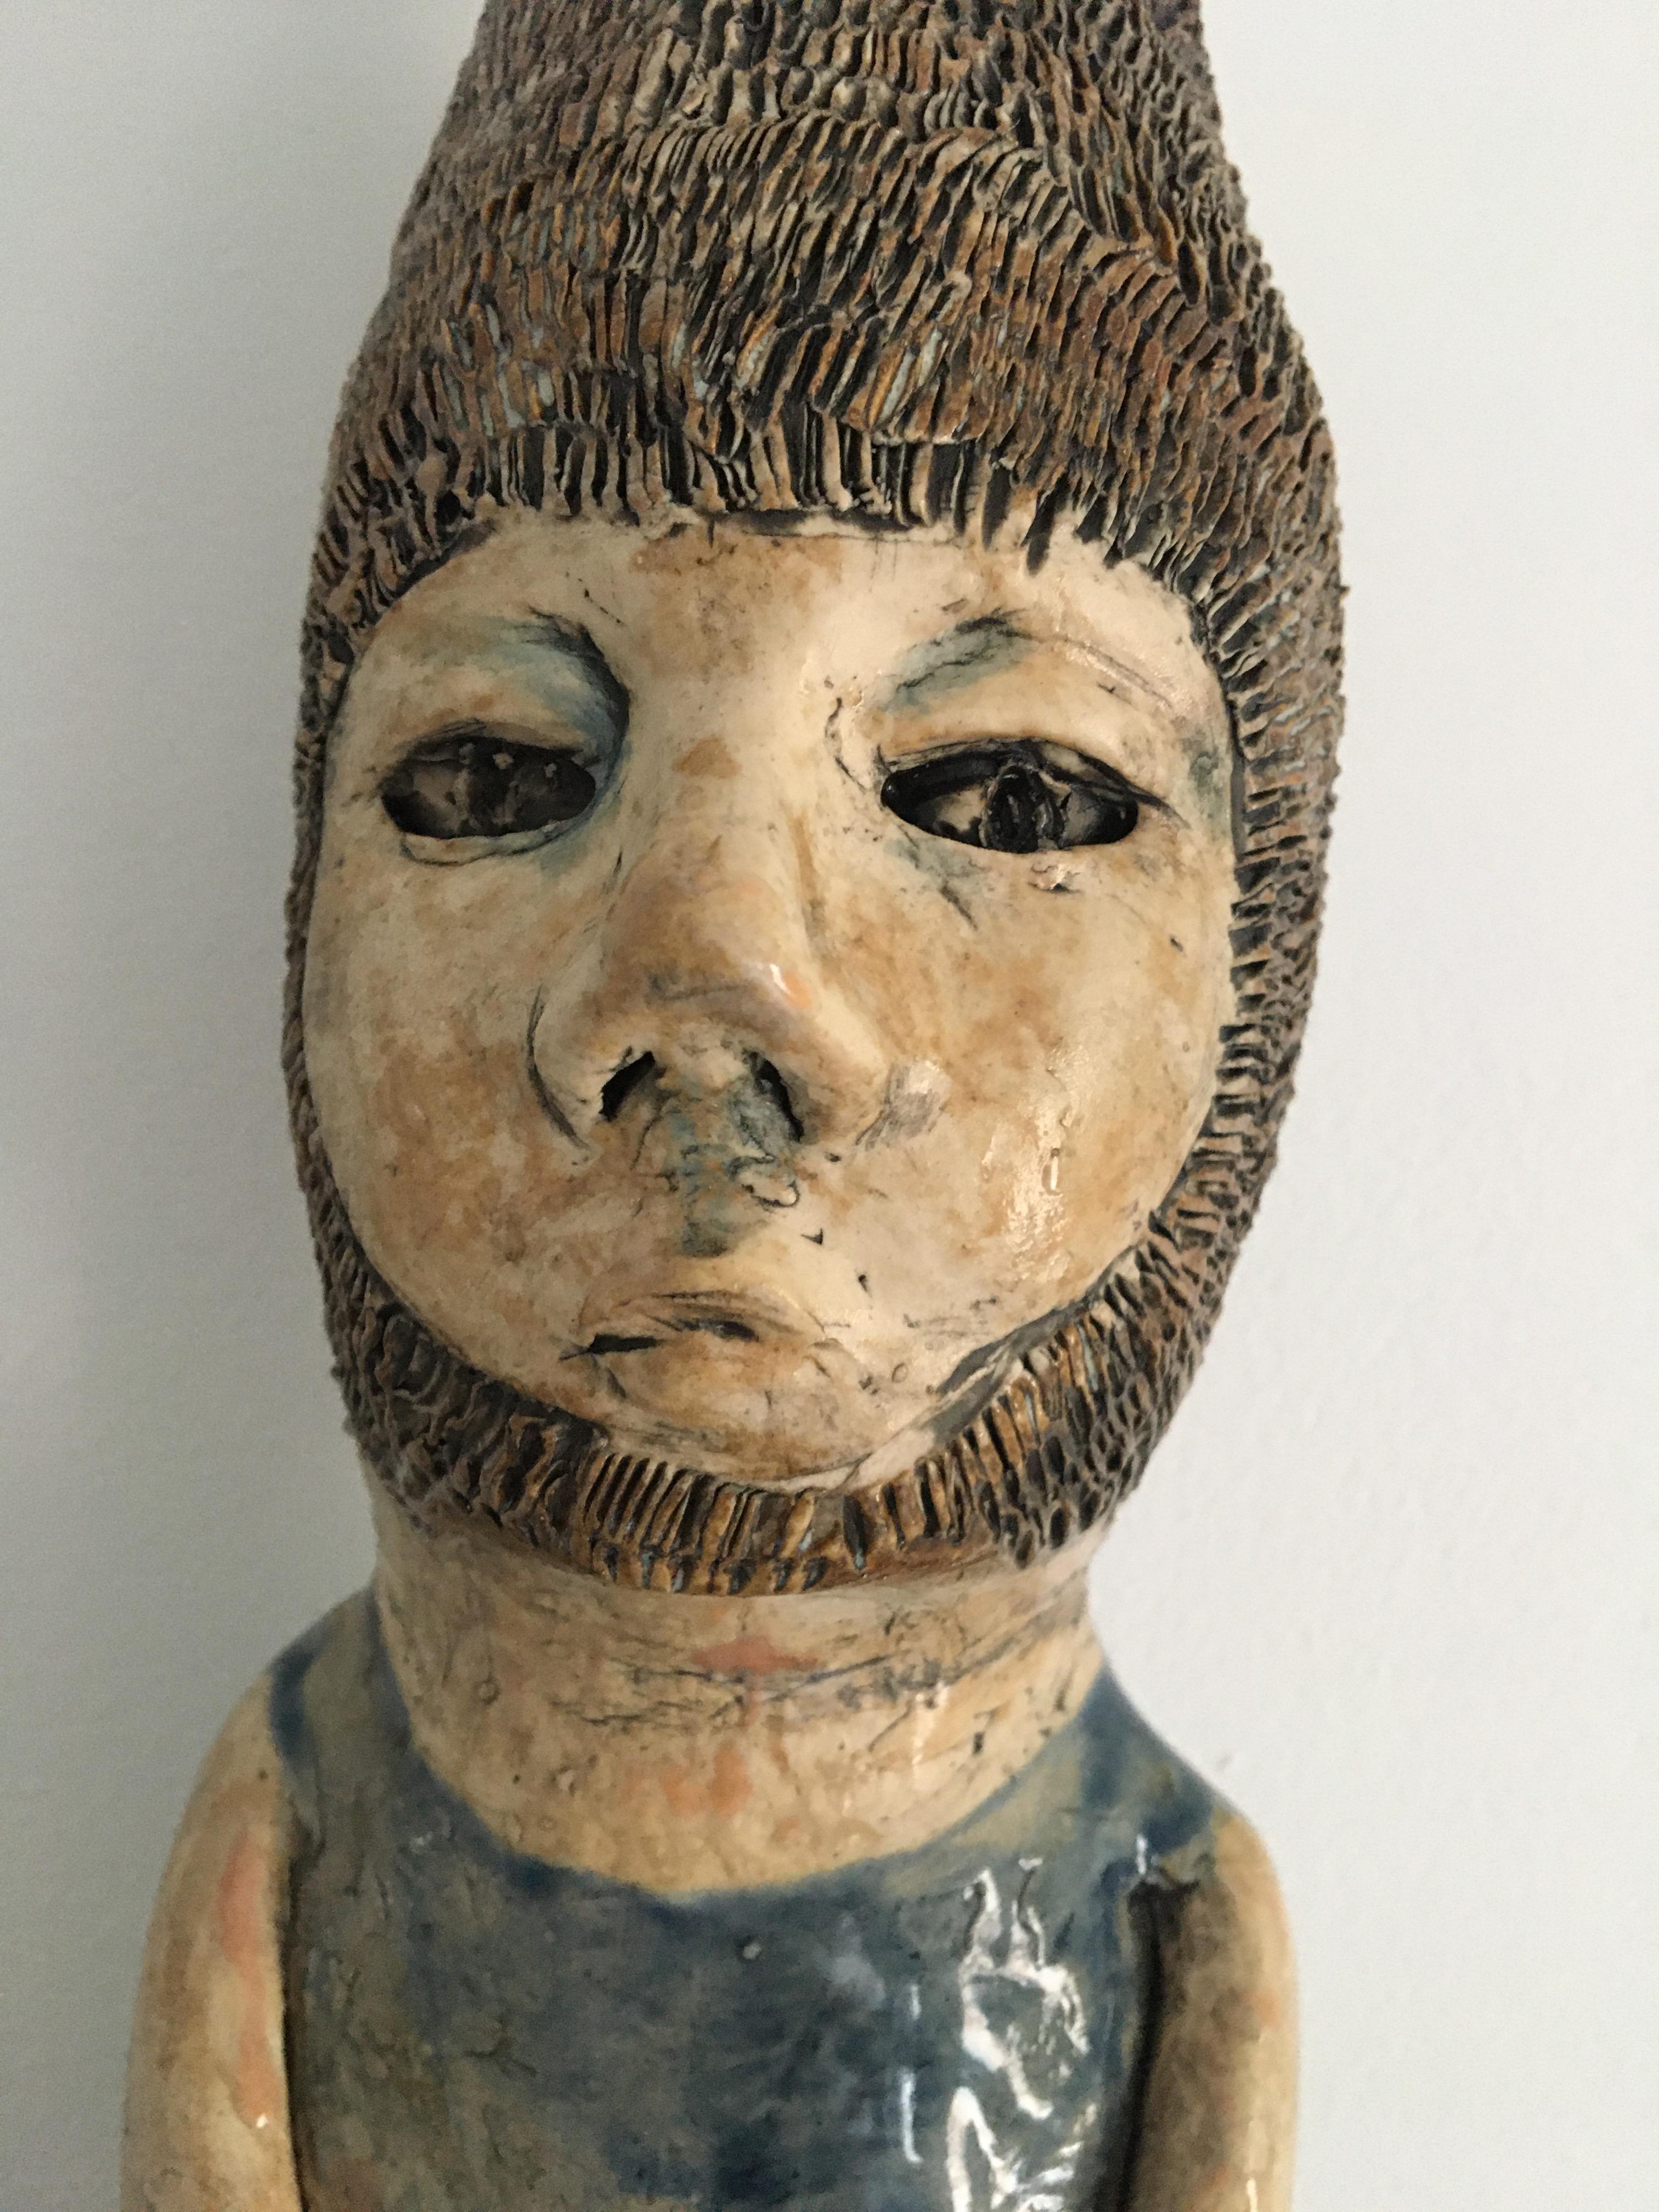 Ceramic woman on wood block: 'My lower self ain’t pretty' - Contemporary Sculpture by Ashley Benton